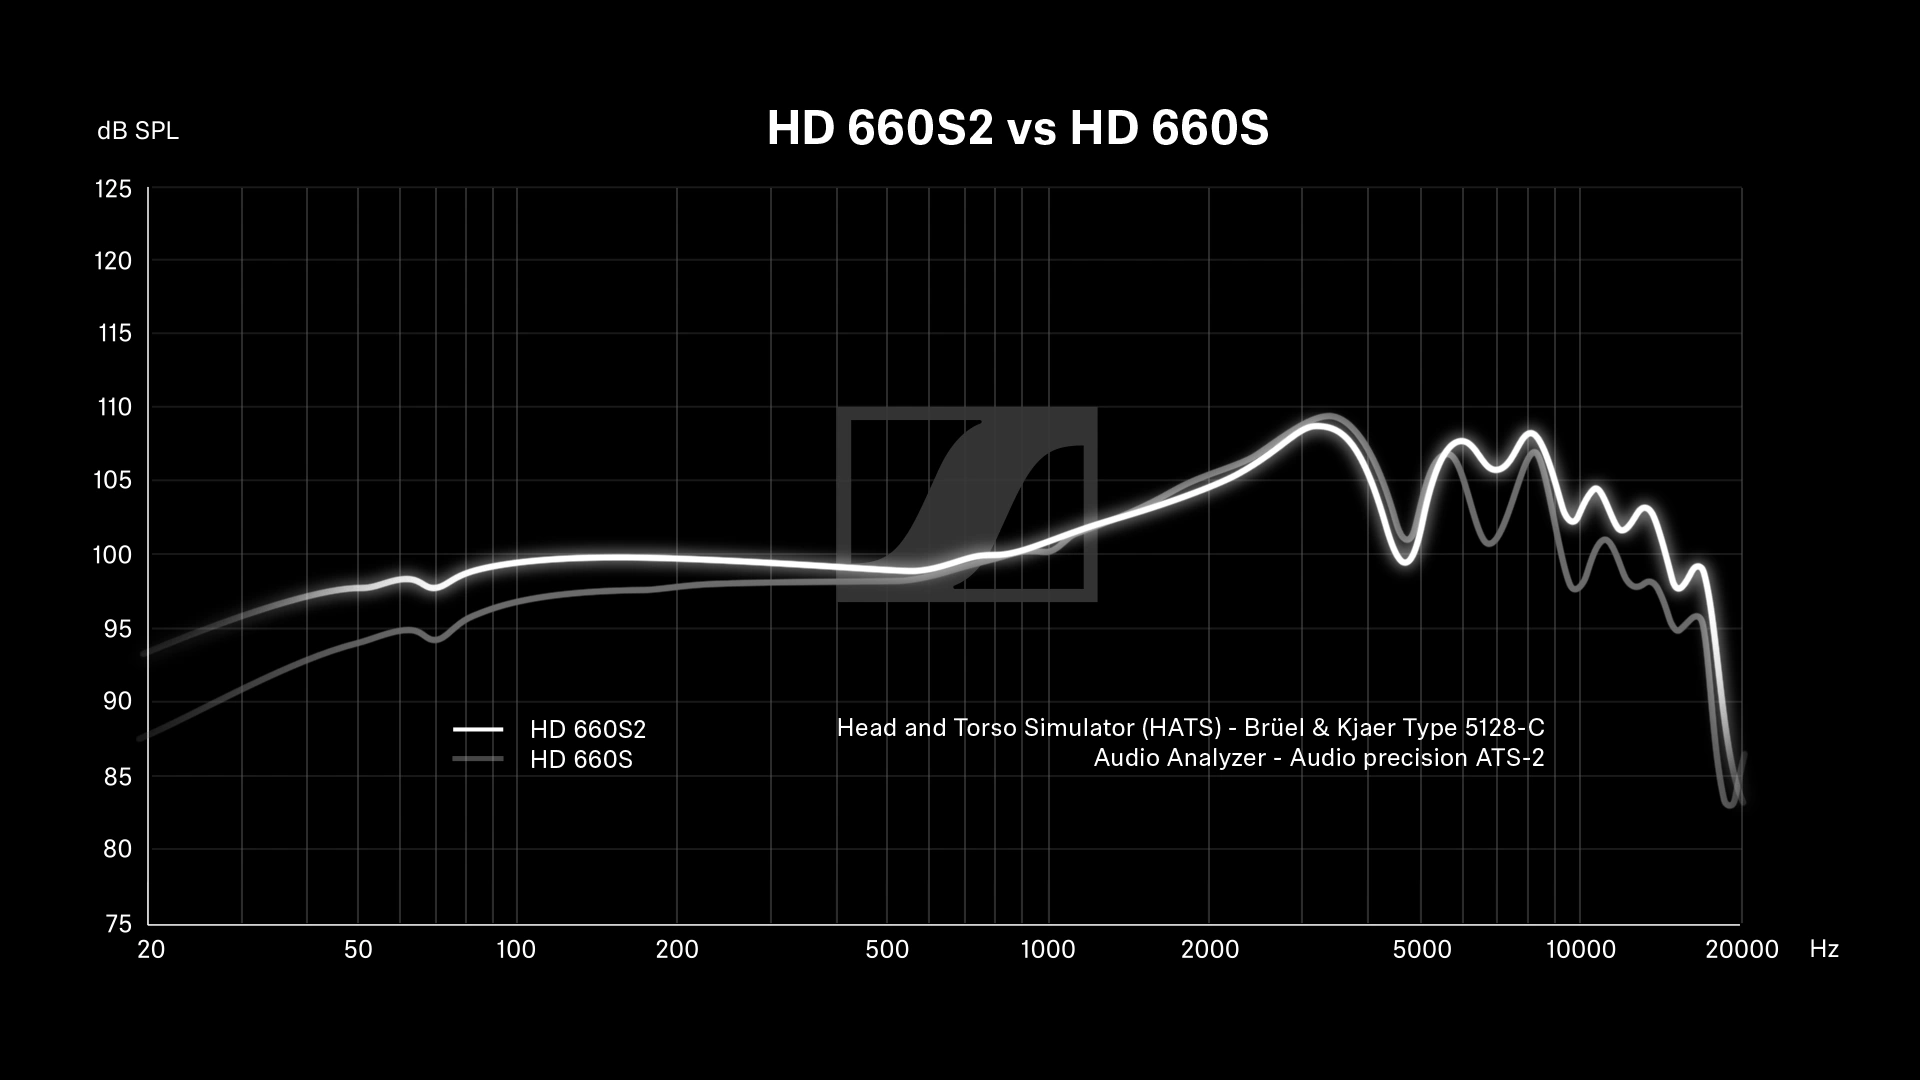 Frequency response graph comparing HD 660s2 and HD 660s